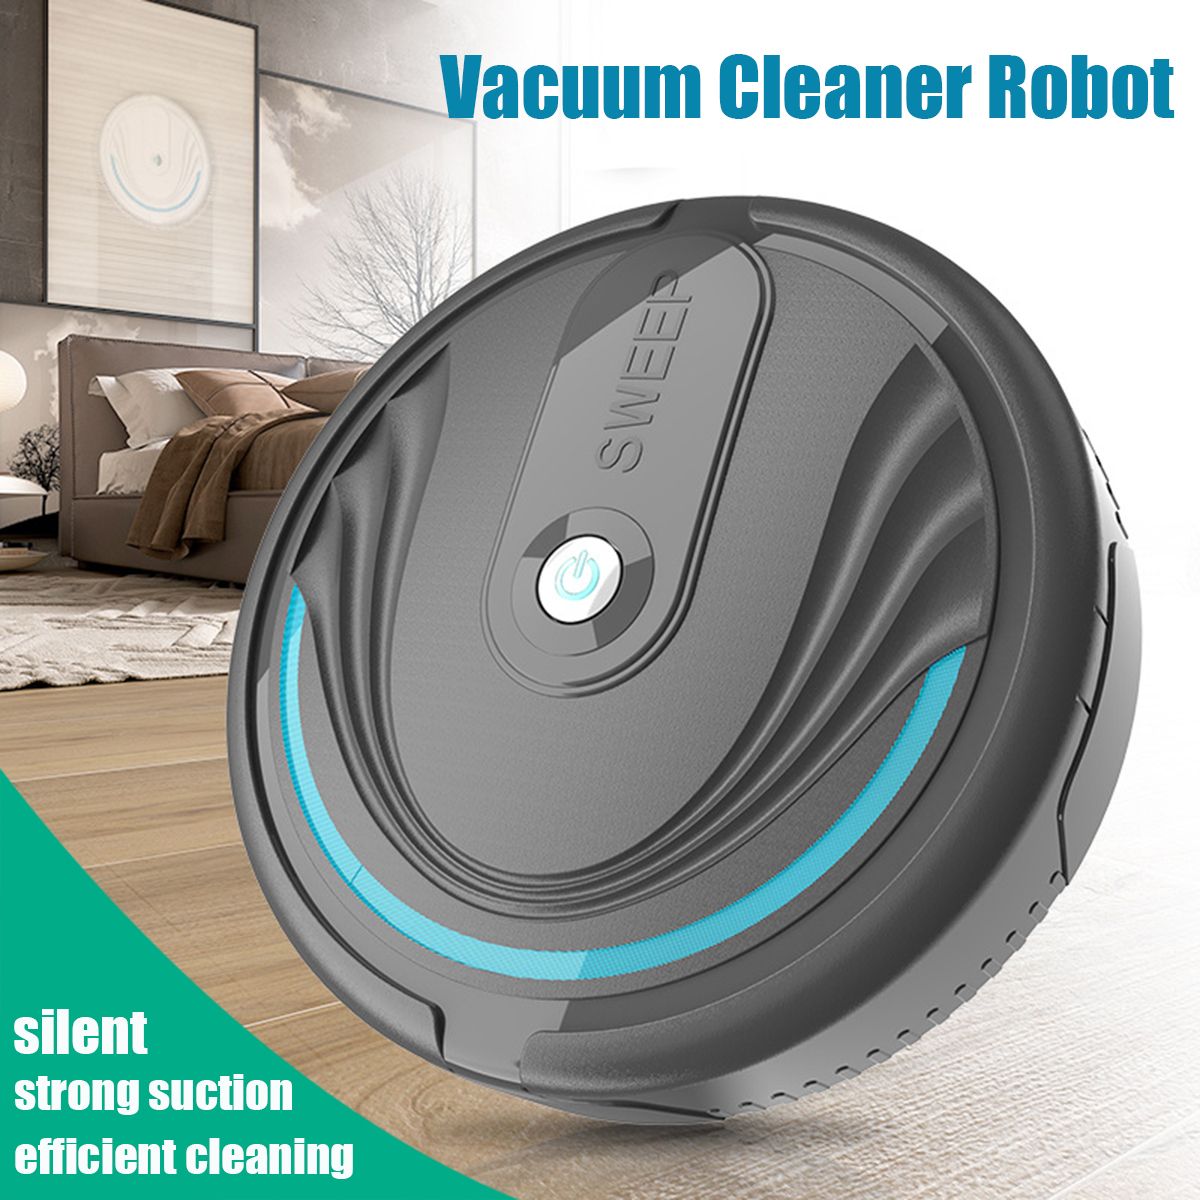 Automatic-Smart-Robot-Vacuum-Cleaner-Cleaning-Sweeper-Silent-Strong-Suction-1464835